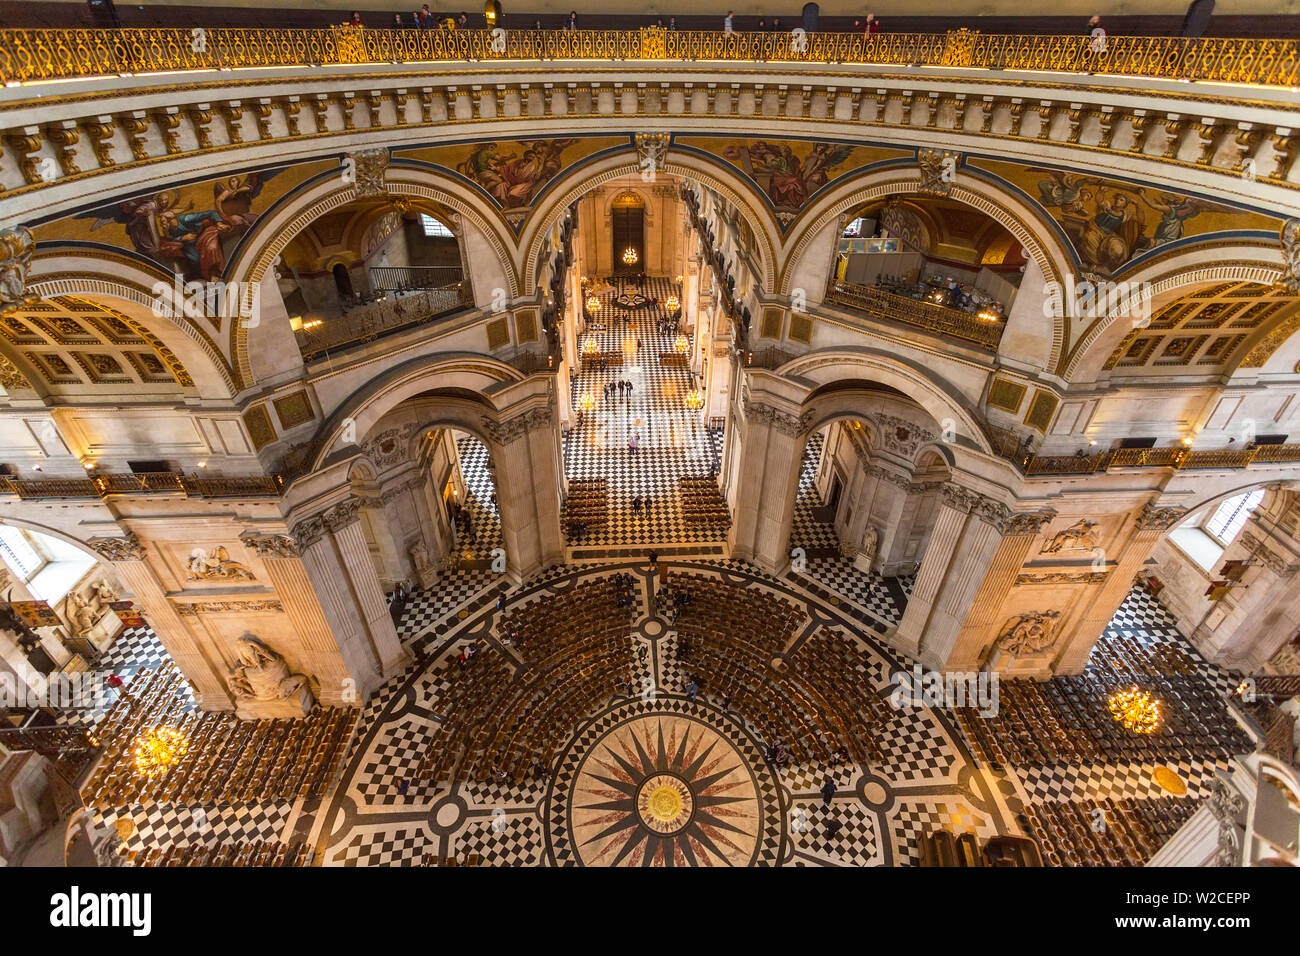 Interior view of St Pauls cathedral from the Whispering Gallery, St Pauls, London Stock Photo